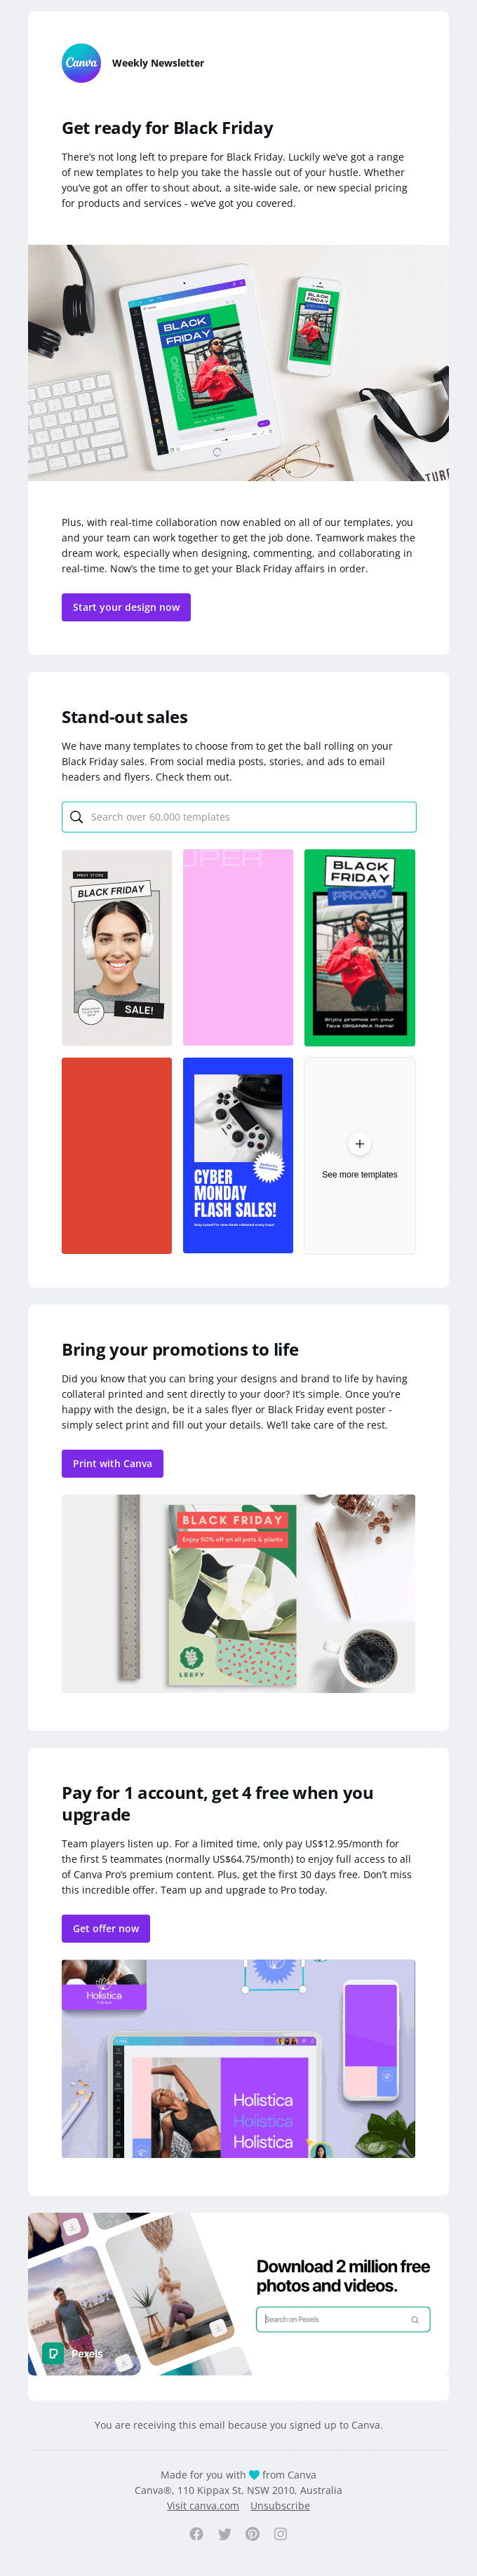 Get ready for Black Friday - Canva Email Newsletter